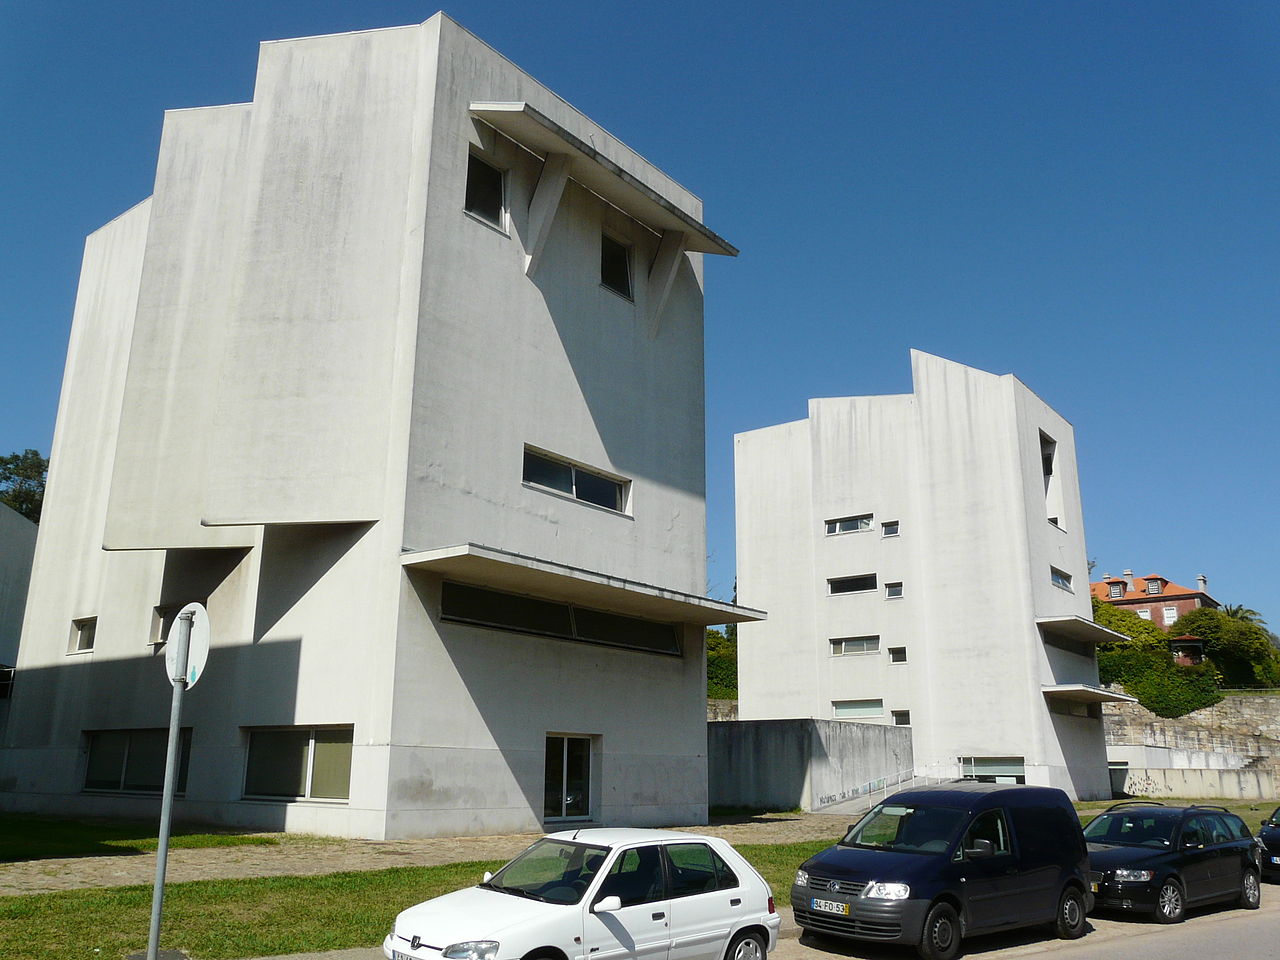 On the campus of Porto's Faculty of Architecture